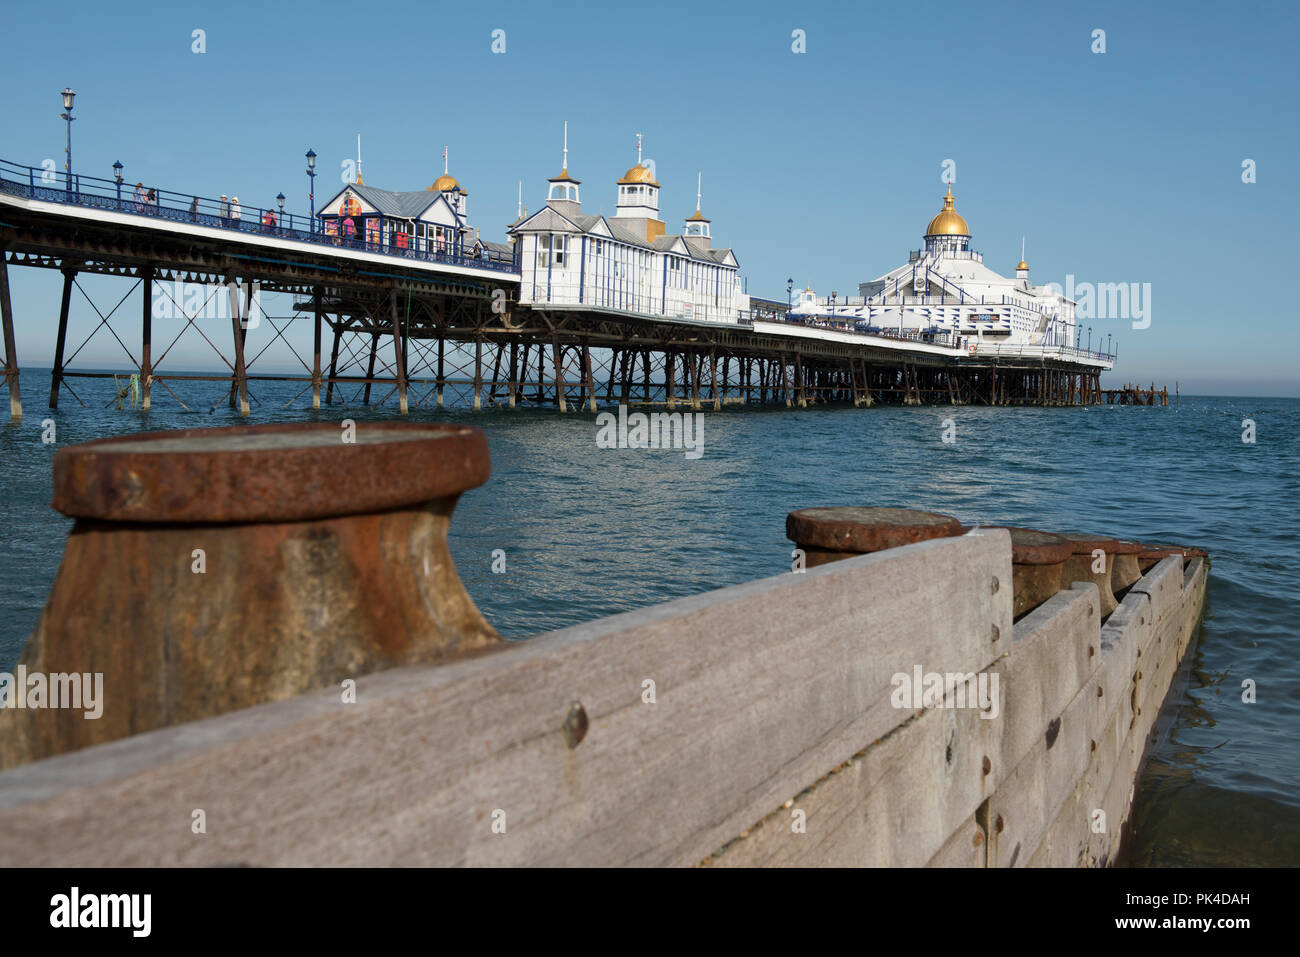 The Victorian Pier in Eastbourne, in the county of East Sussex on the south coast of England, in the UK. Stock Photo